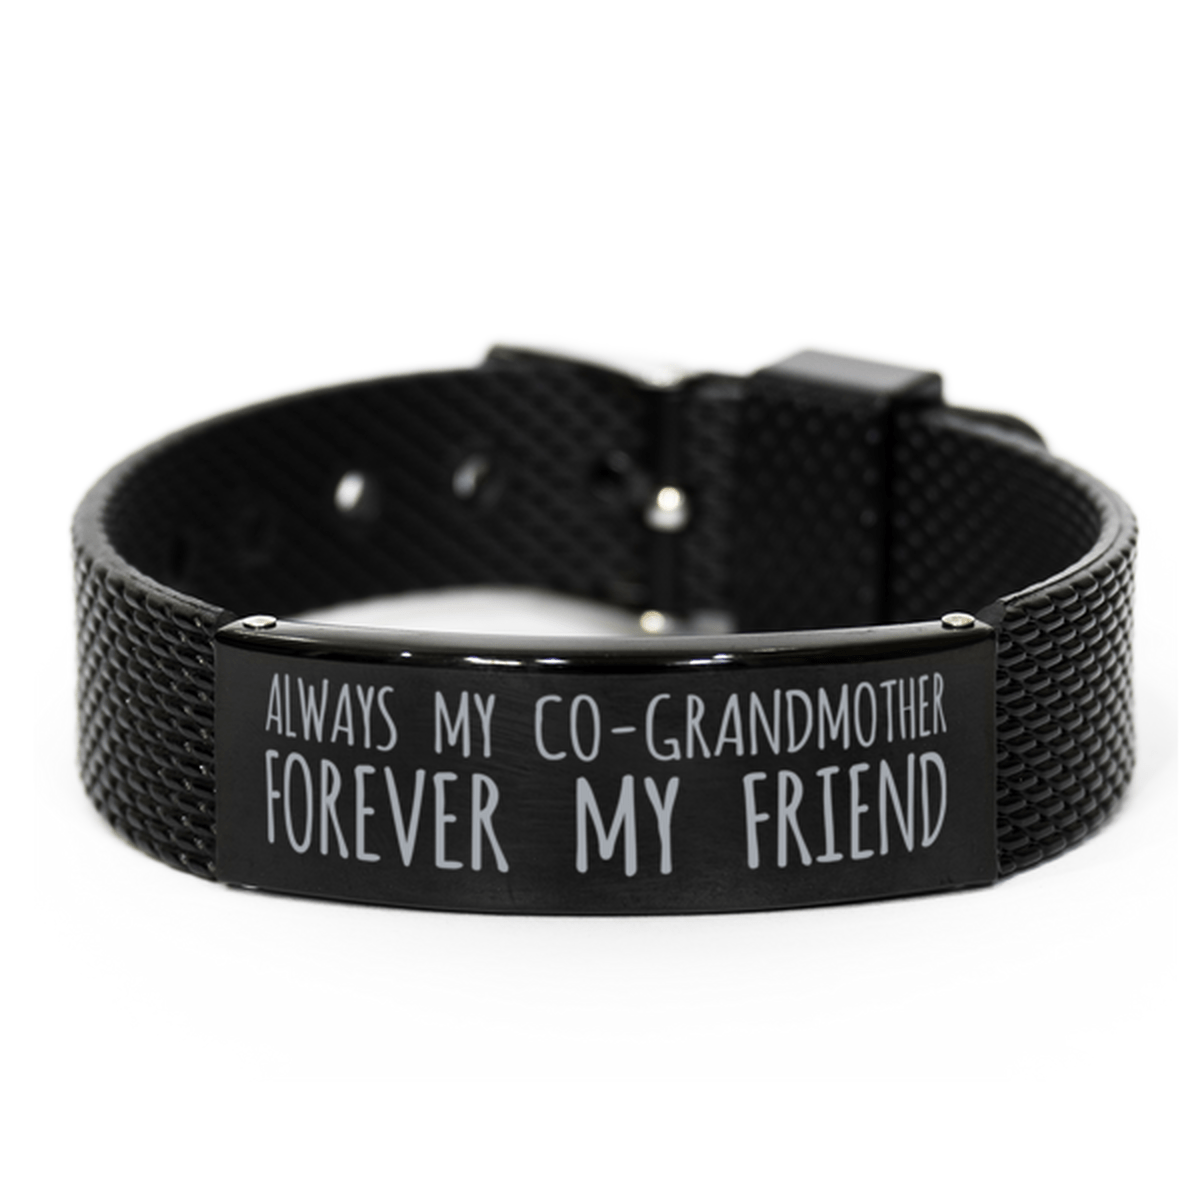 Inspirational Co-Grandmother Black Shark Mesh Bracelet, Always My Co-Grandmother Forever My Friend, Best Birthday Gifts for Family Friends